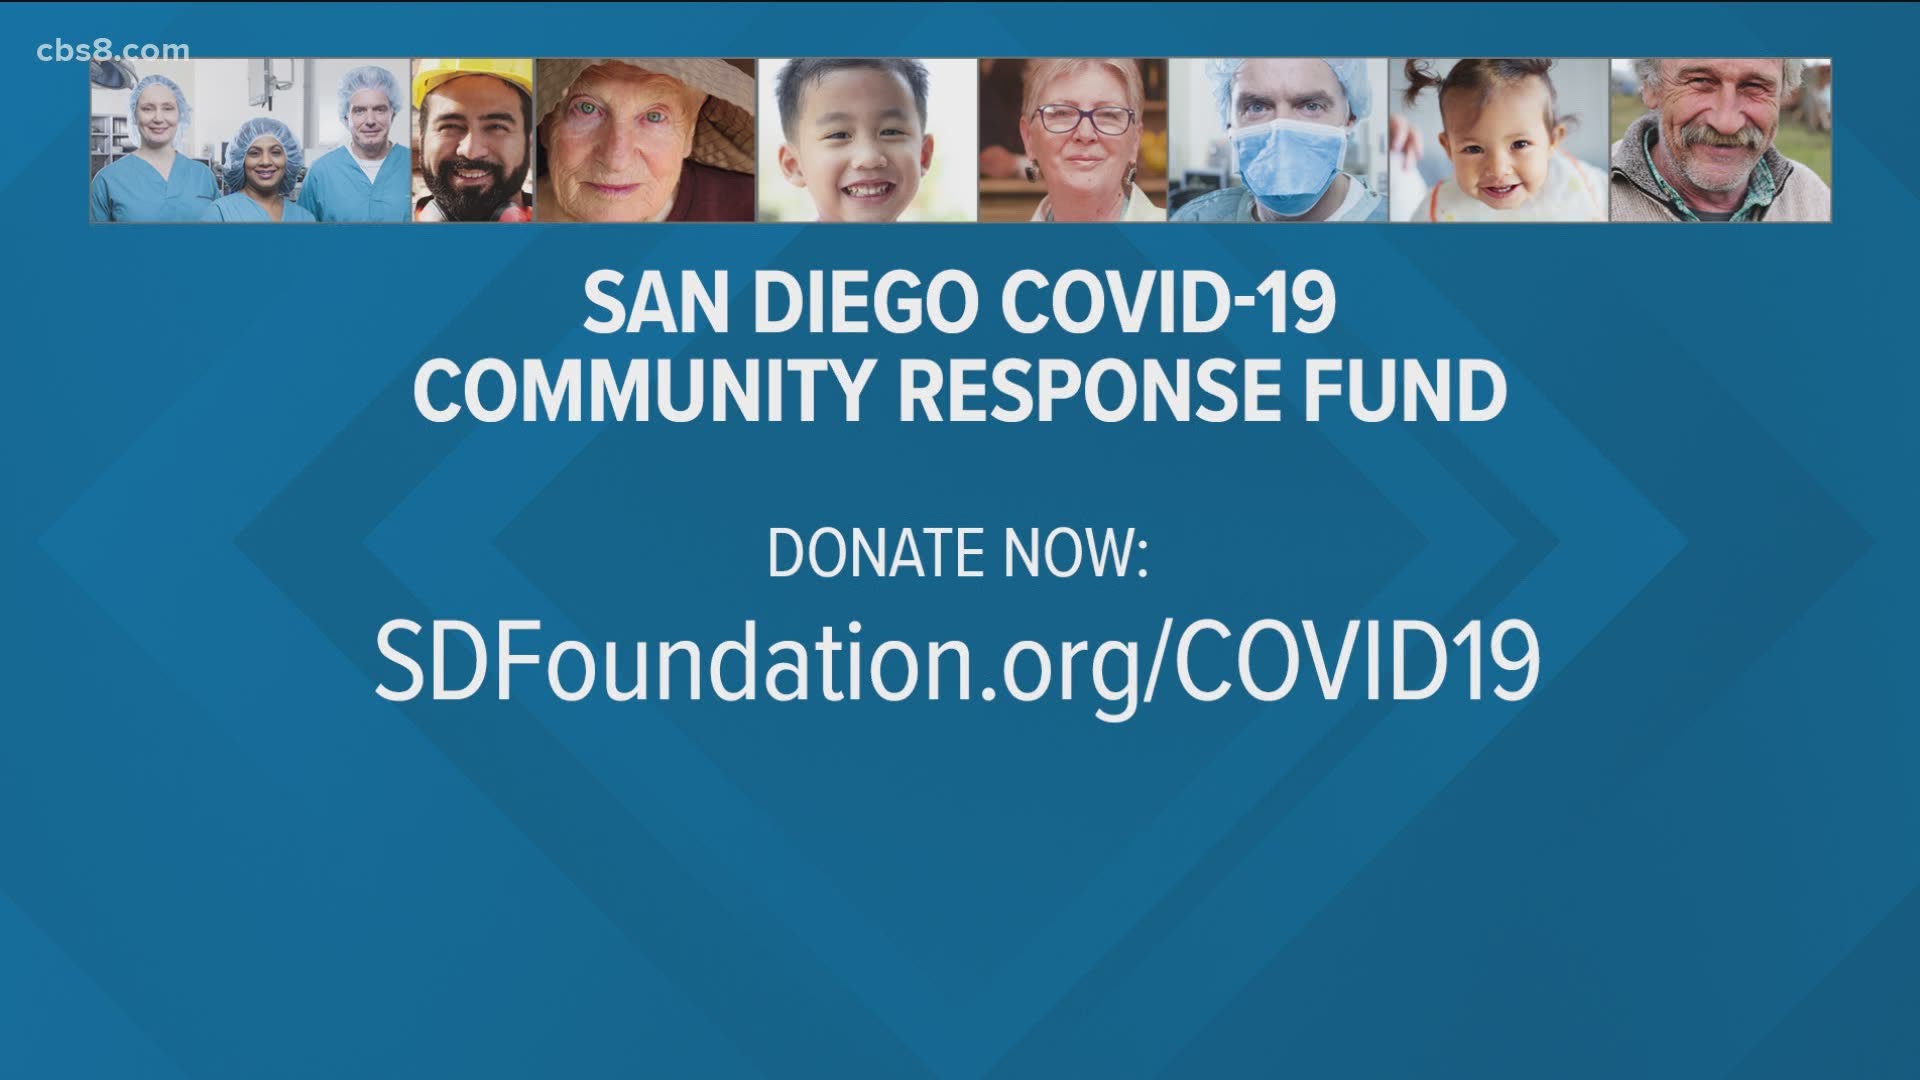 New donations to the COVID-19 Community Response Fund will be matched one-to-one by the Hervey Family Fund at The San Diego Foundation.